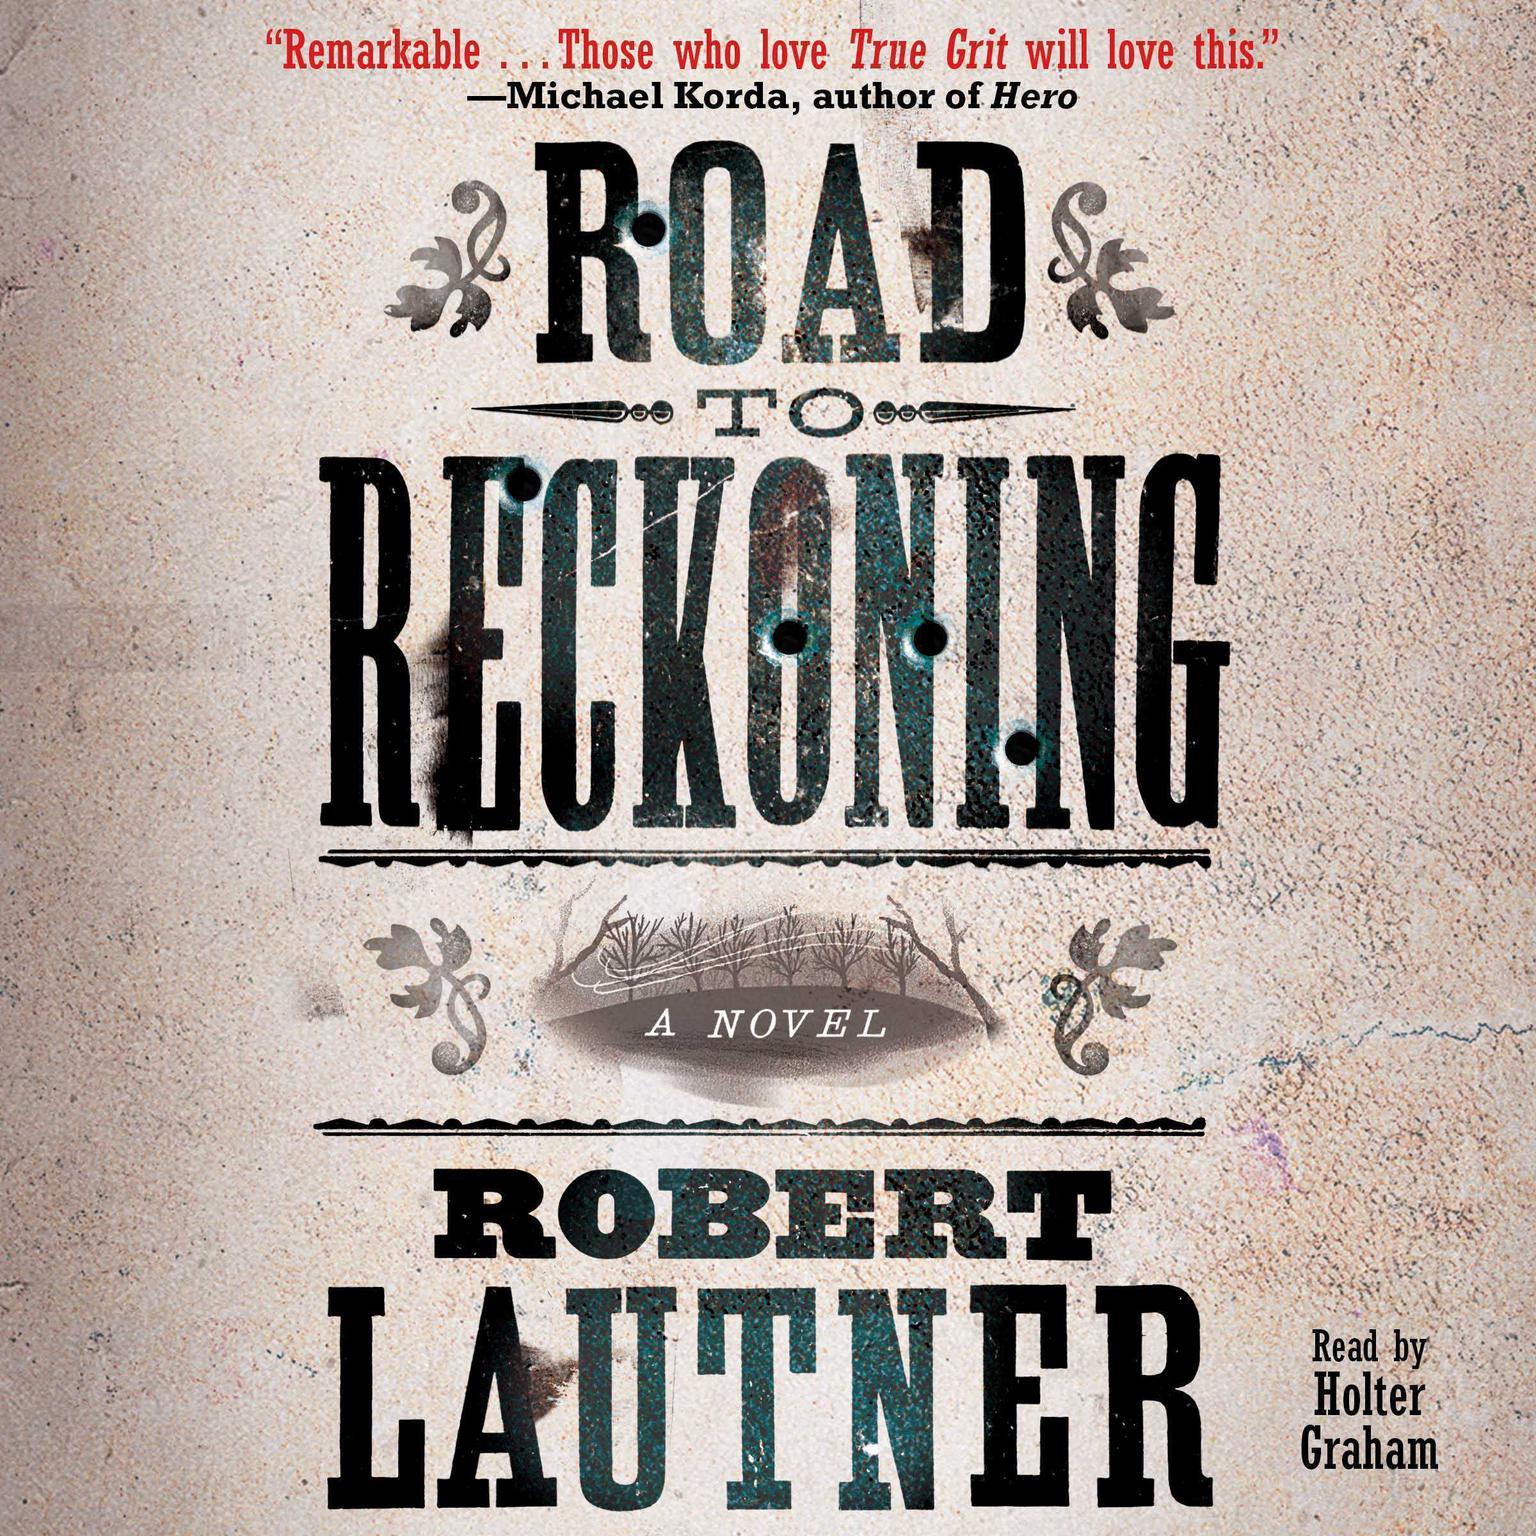 Road to Reckoning: A Novel Audiobook, by Robert Lautner